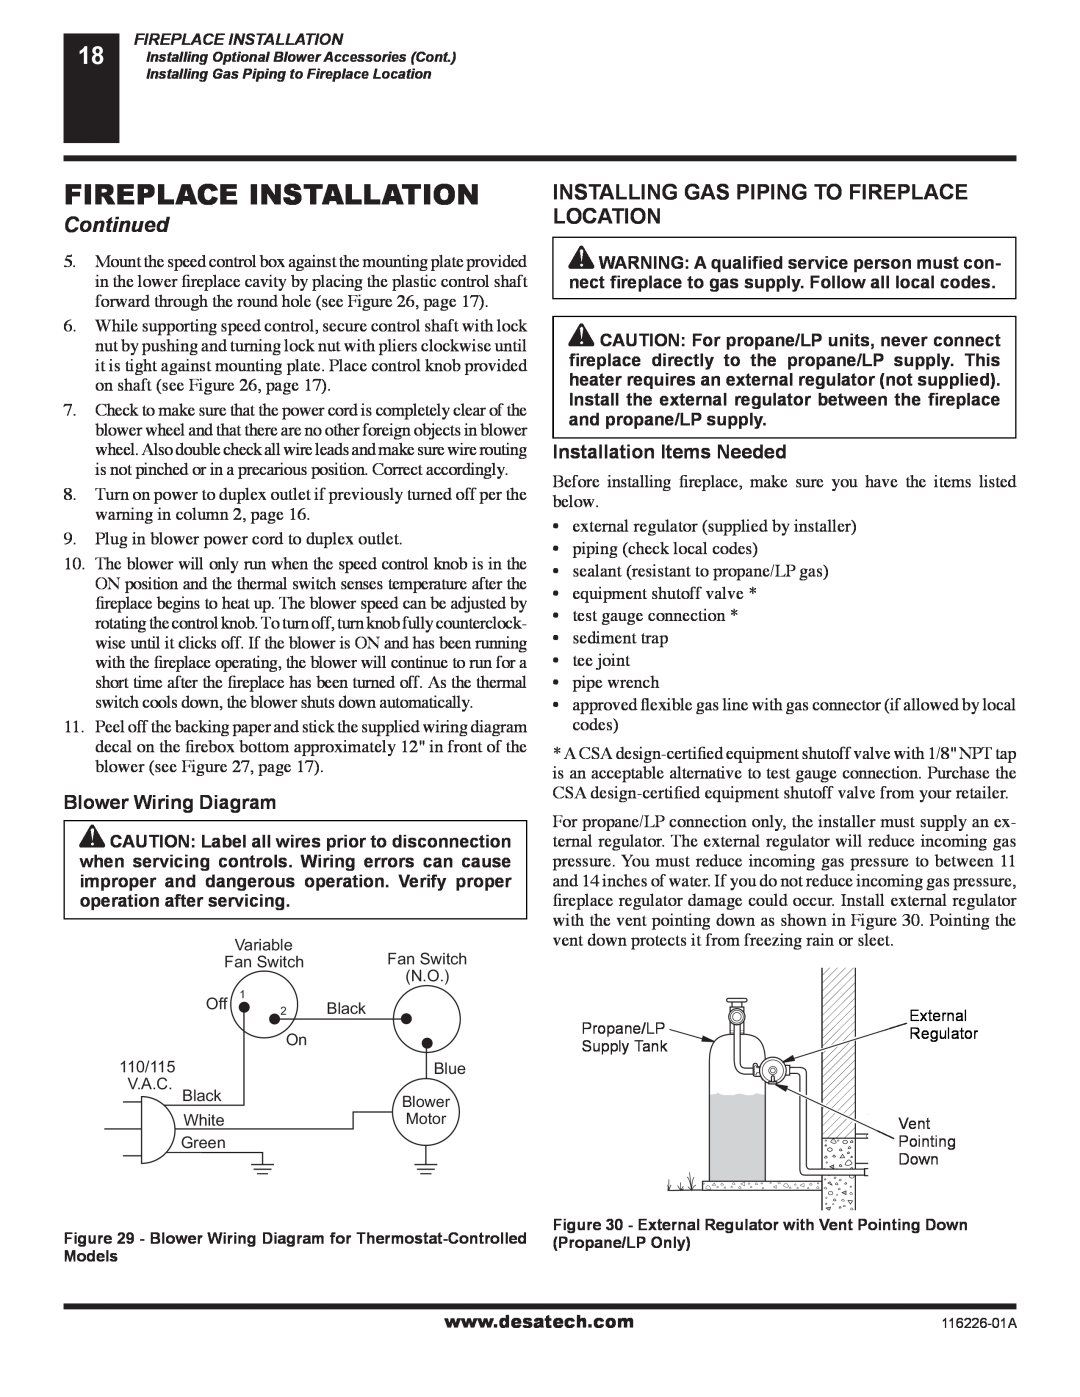 Desa (V)KC36N Installing Gas Piping To Fireplace Location, Blower Wiring Diagram, Installation Items Needed, Continued 